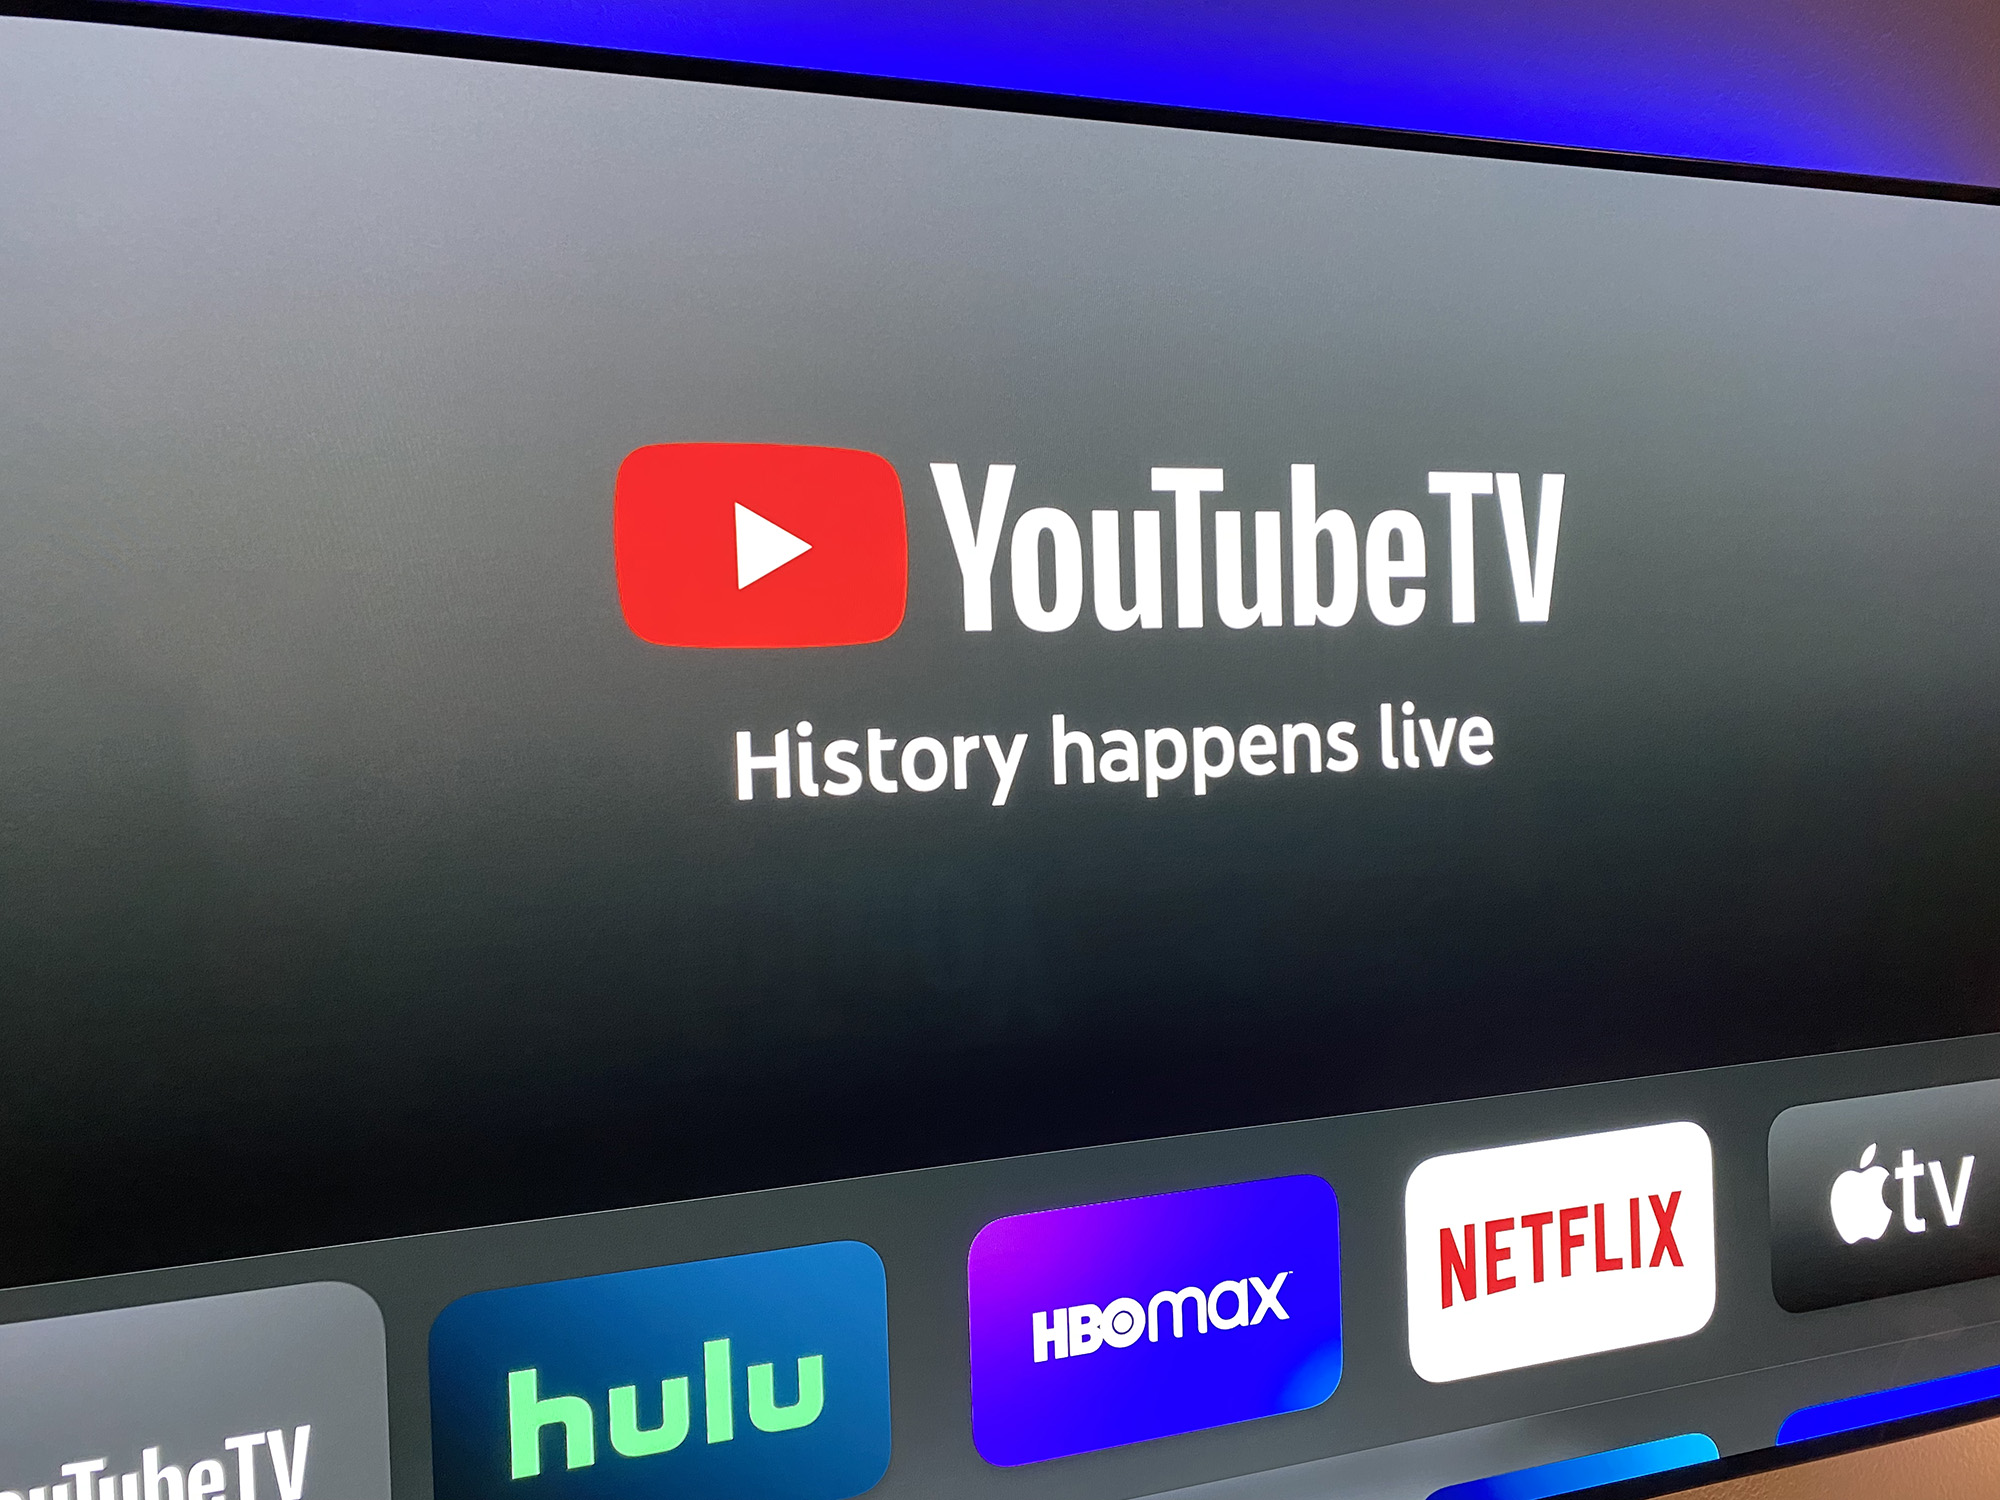  YouTube TV loses Disney-owned channels, including ESPN, FX, and ABC